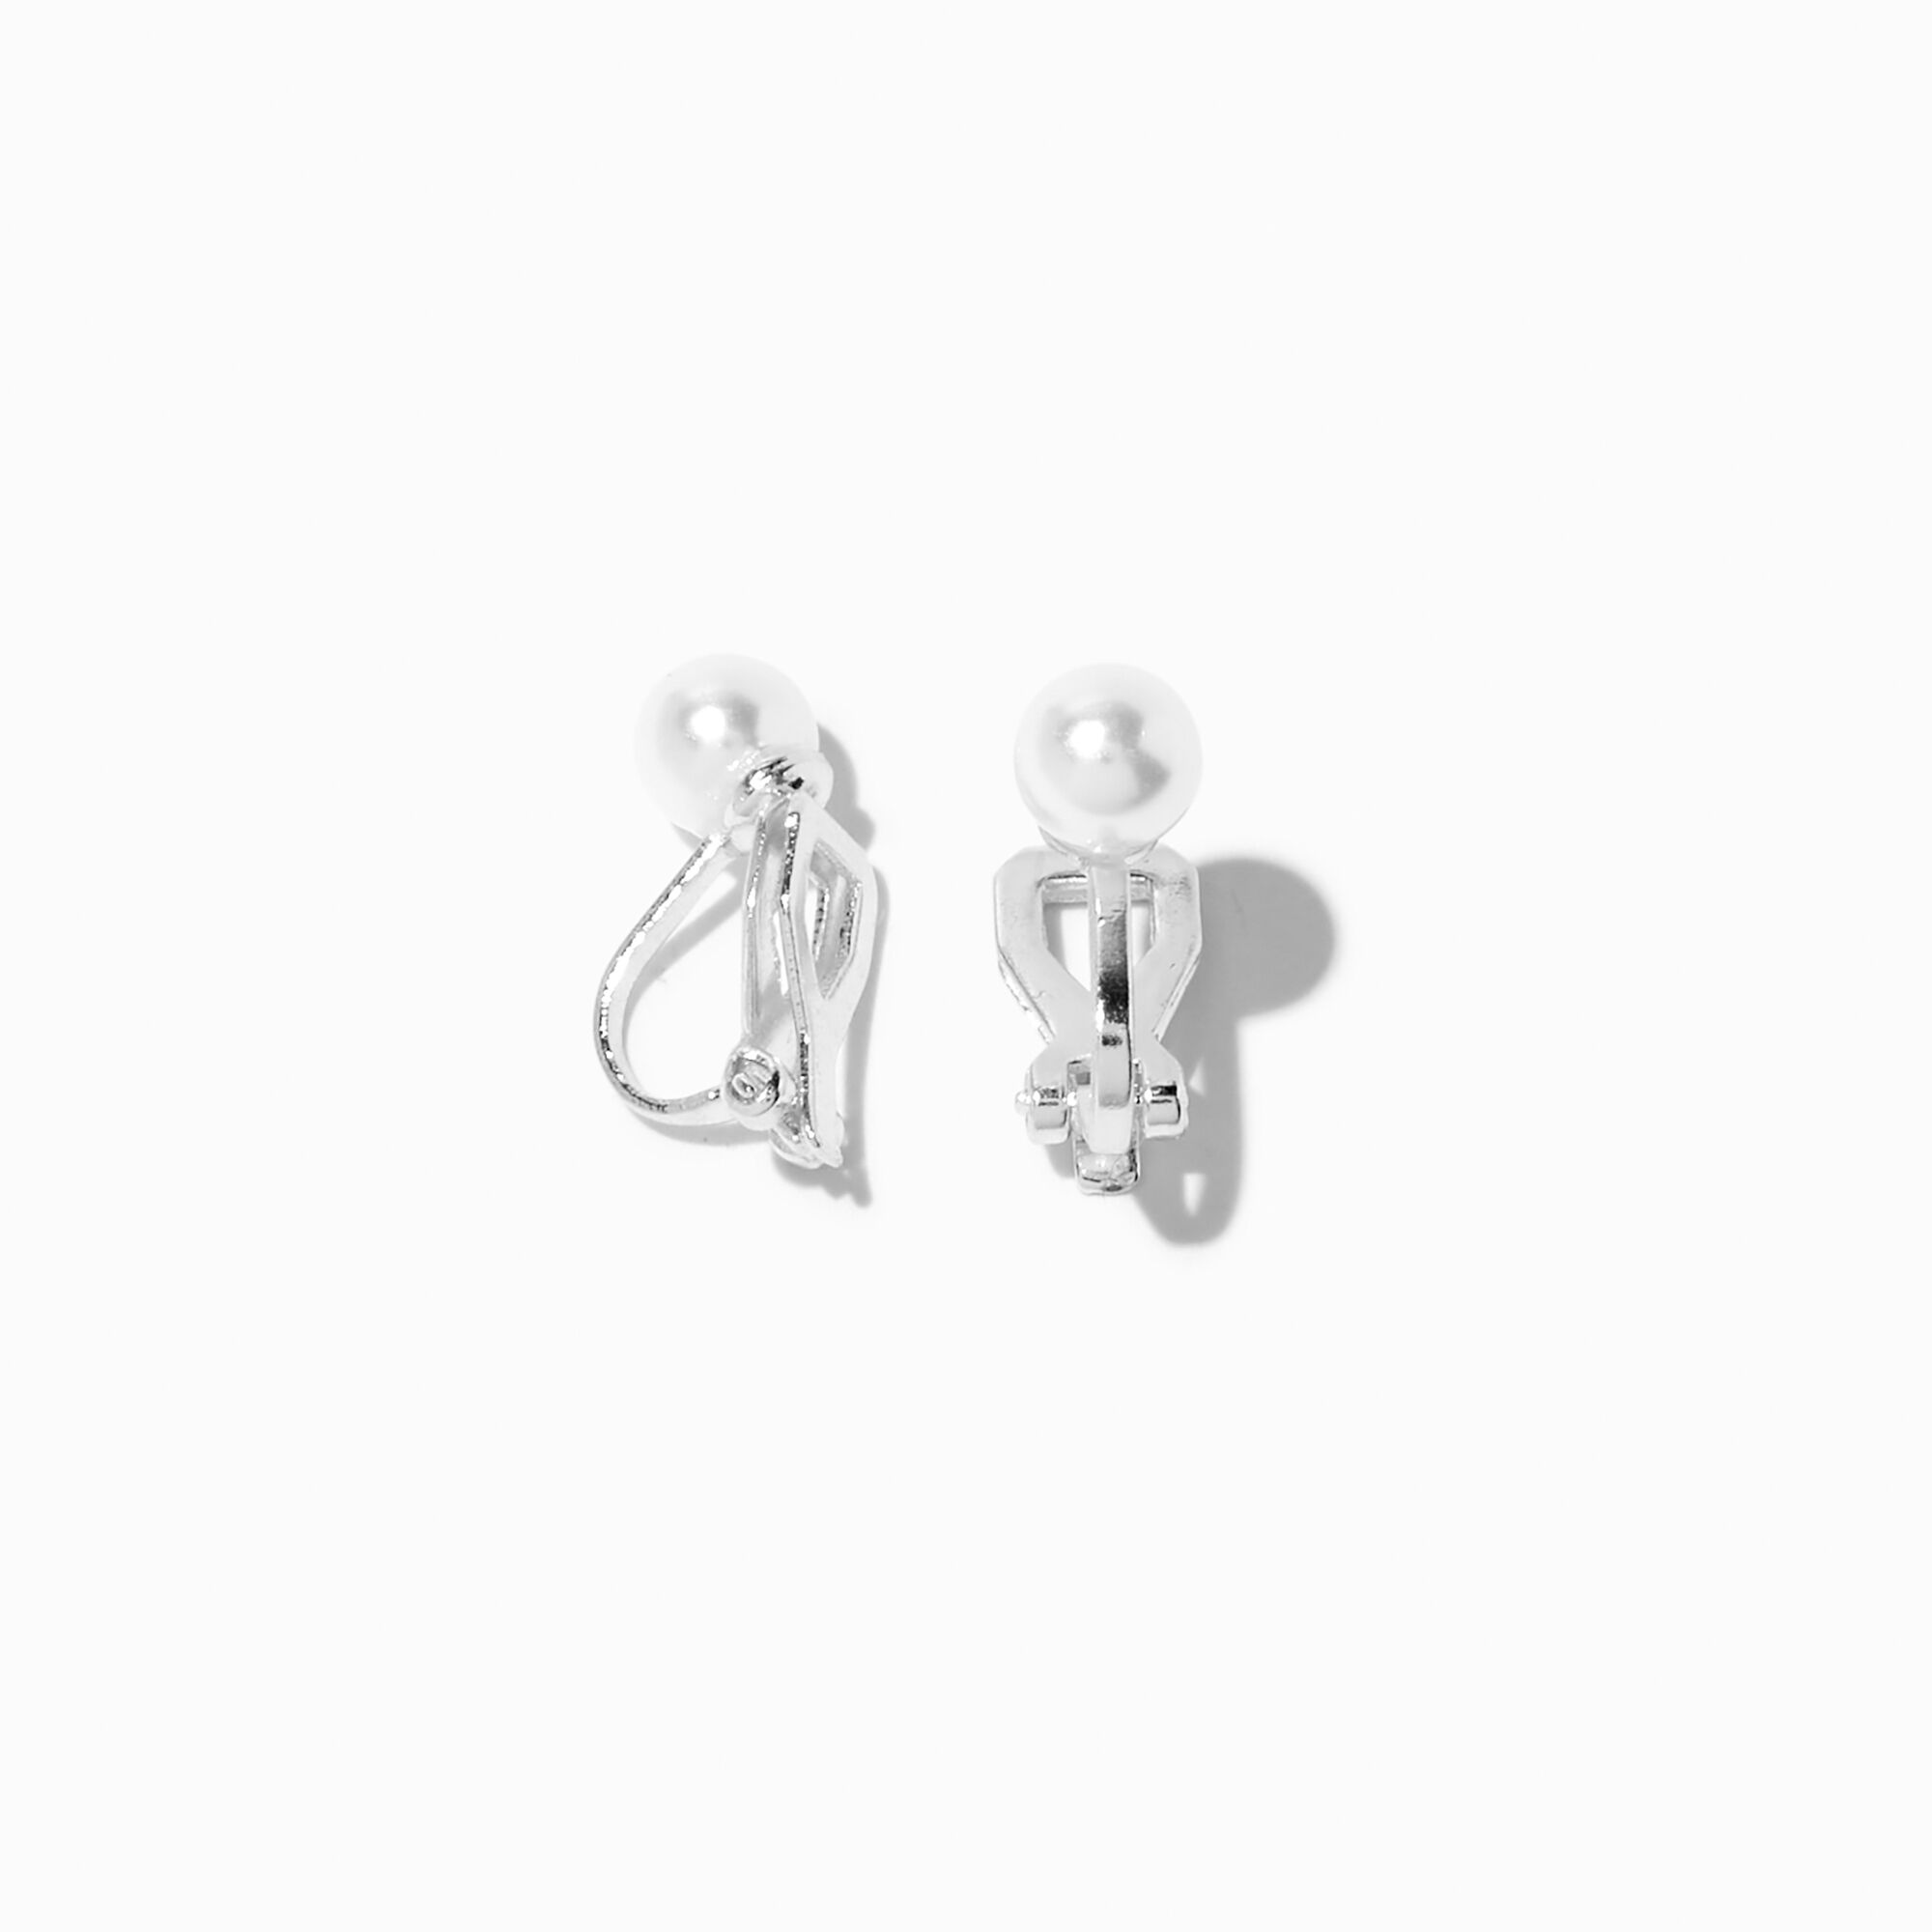 View Claires SilverTone 6MM Pearl ClipOn Earrings White information